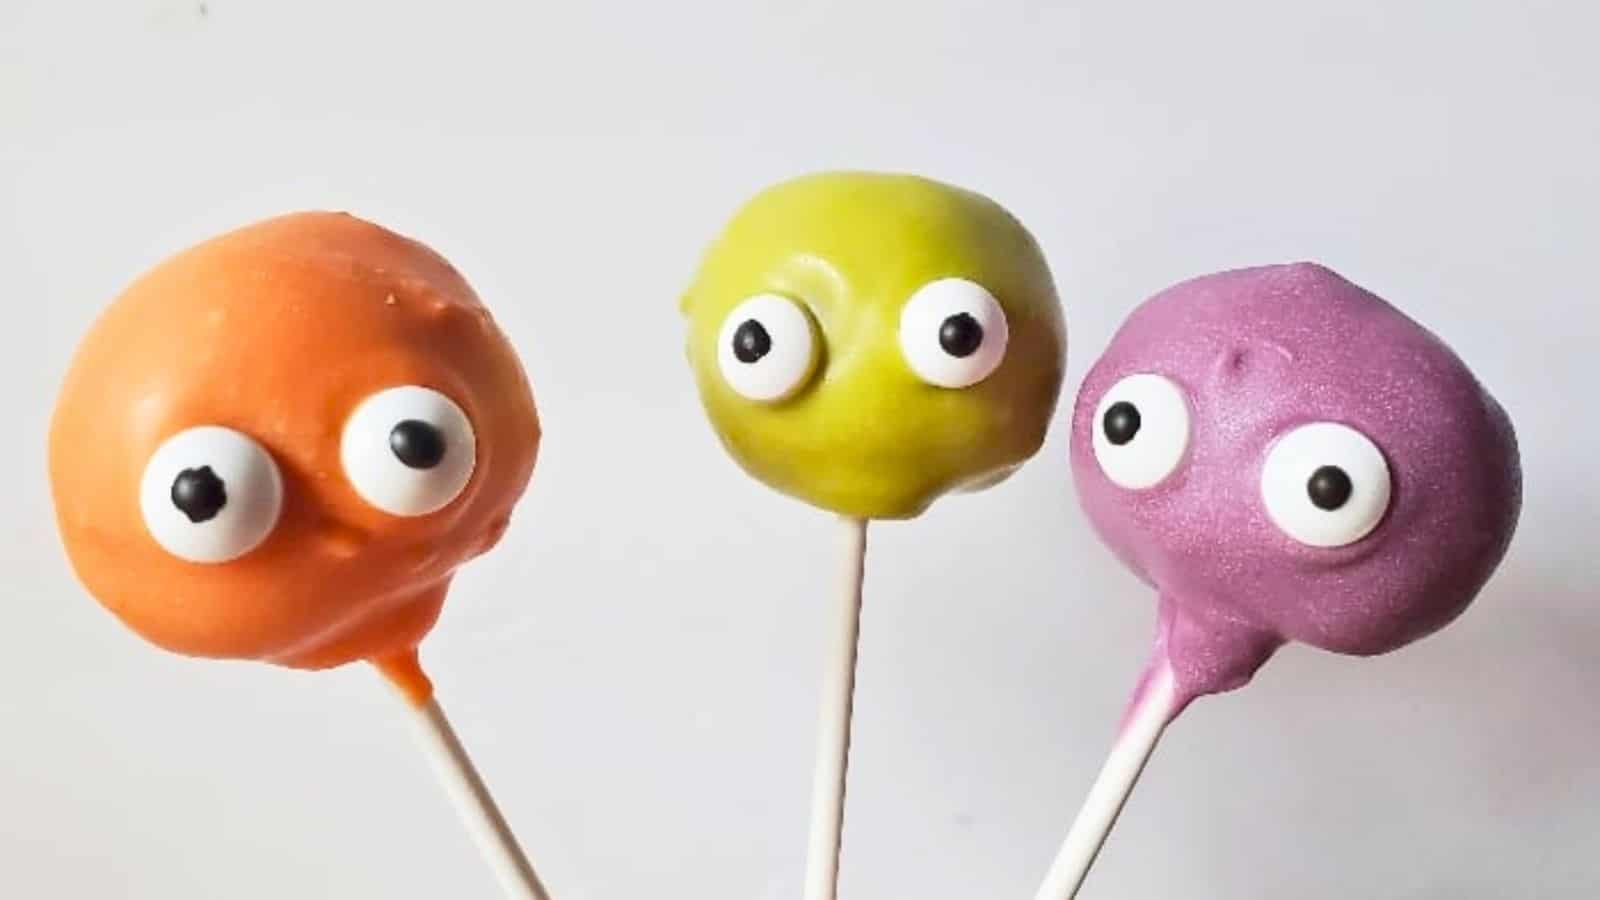 Image shows three monster cake pops in various colors against a white background.